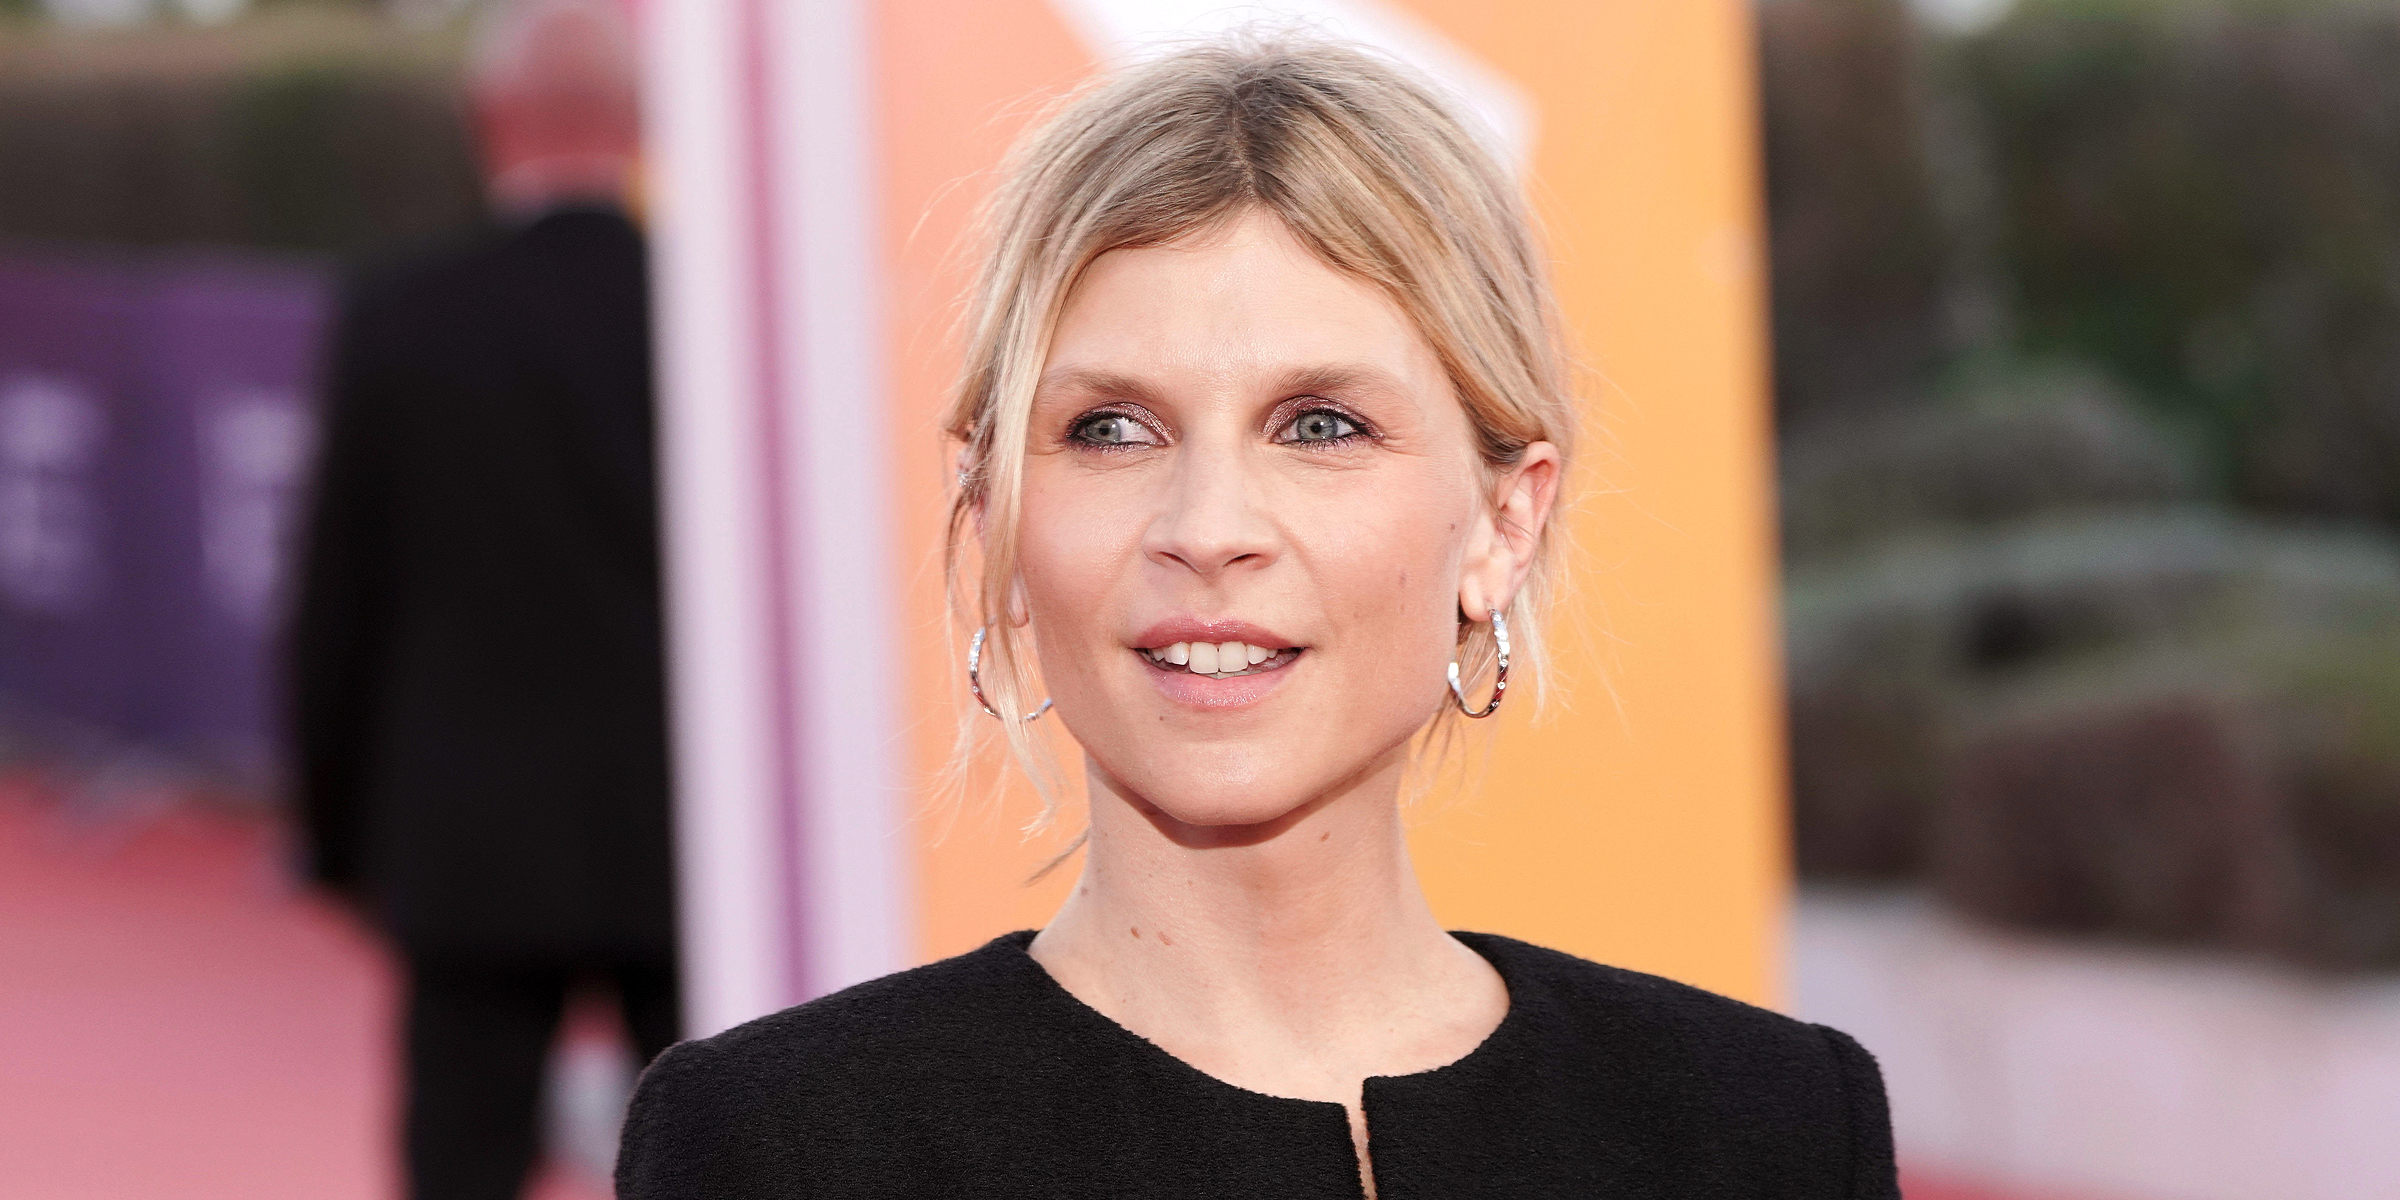 Clémence Poésy | Source: Getty Images